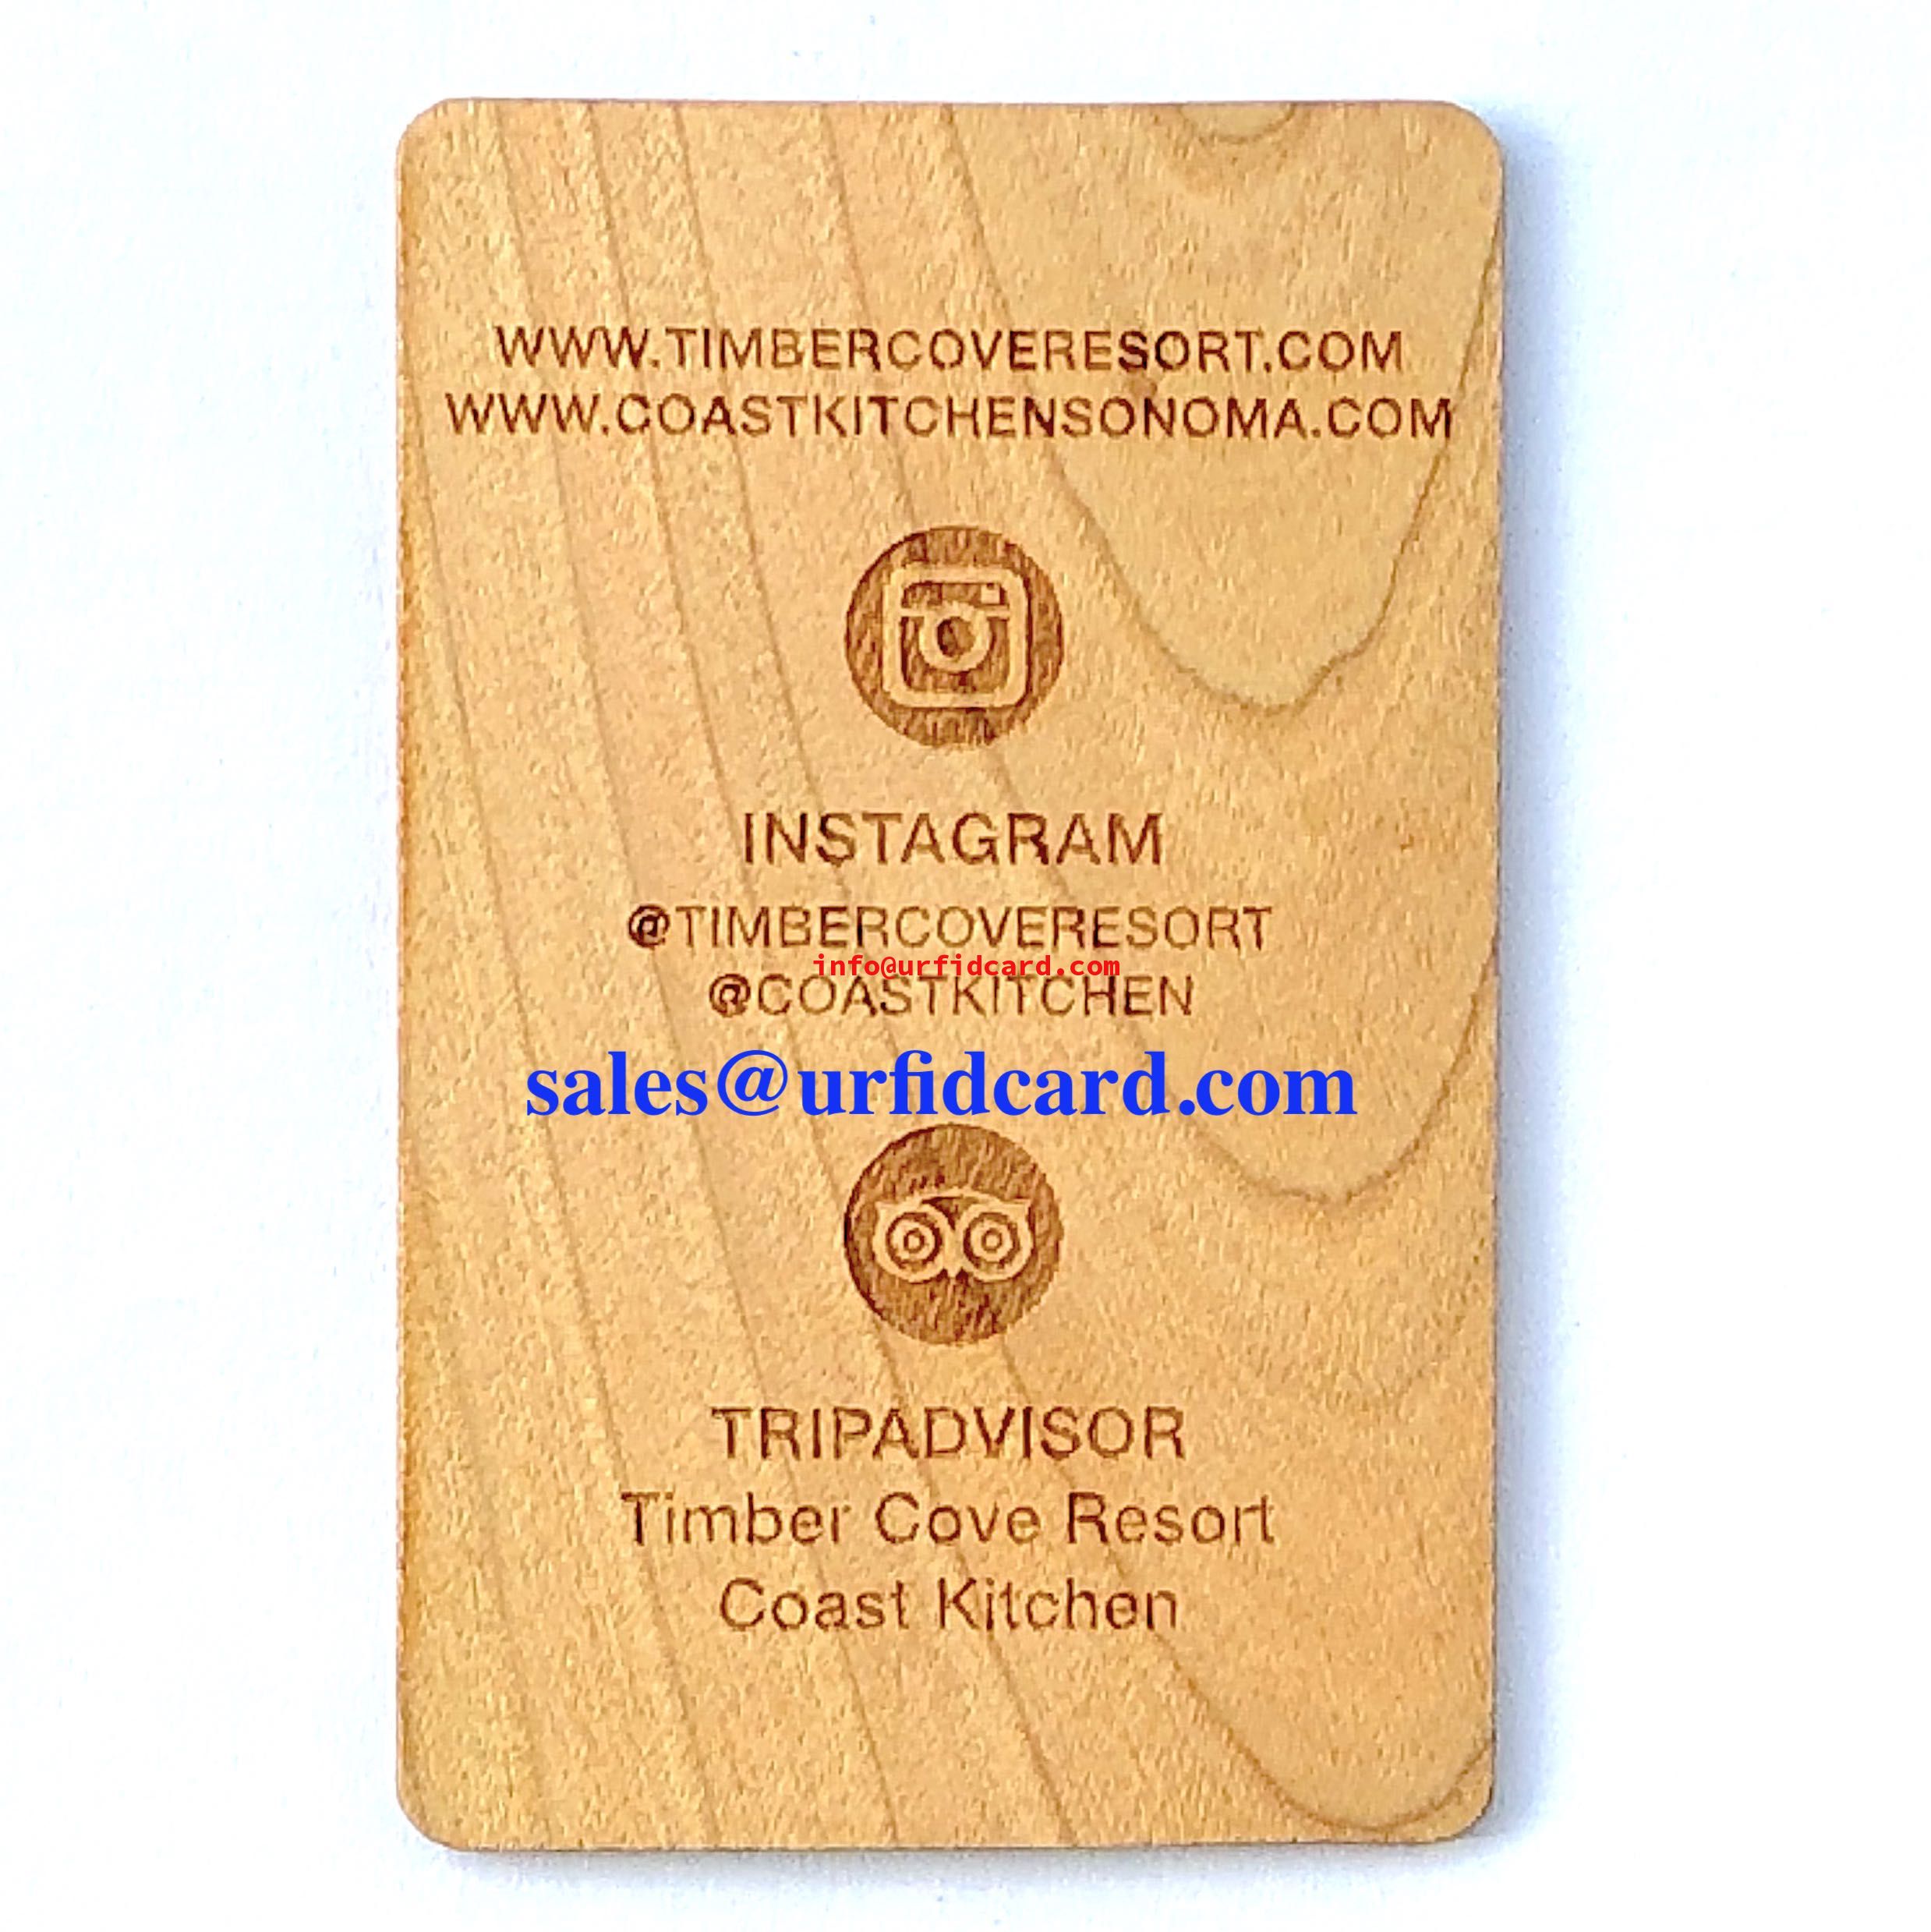 More Eco-friendly and Carbon Neutral Cards/Keys